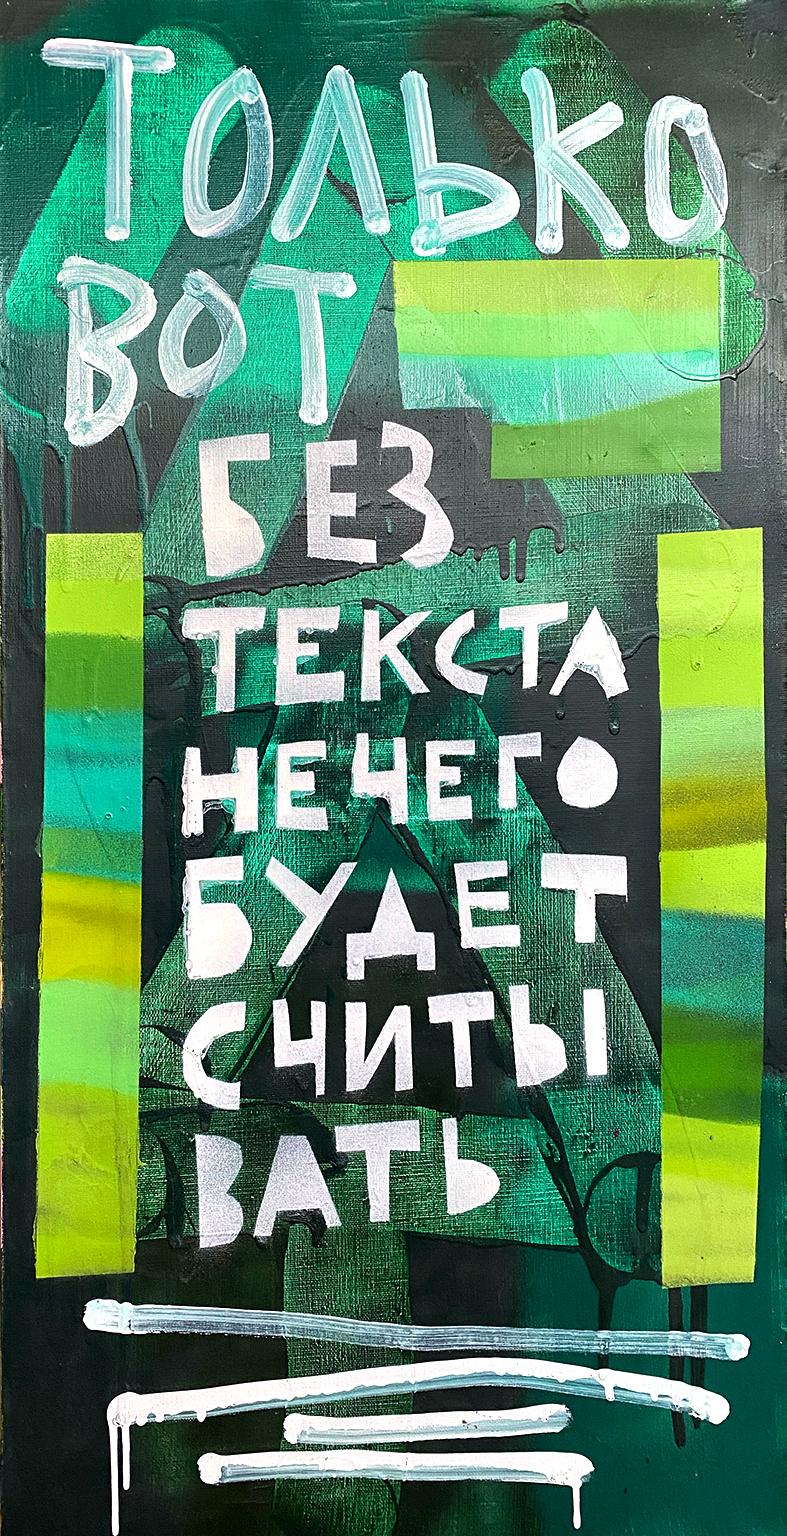 Will Be Nothing To Read - Contemporary Acrylic Painting - Street Art - Mixed Media Art by Kirill Lebedev (Kto)